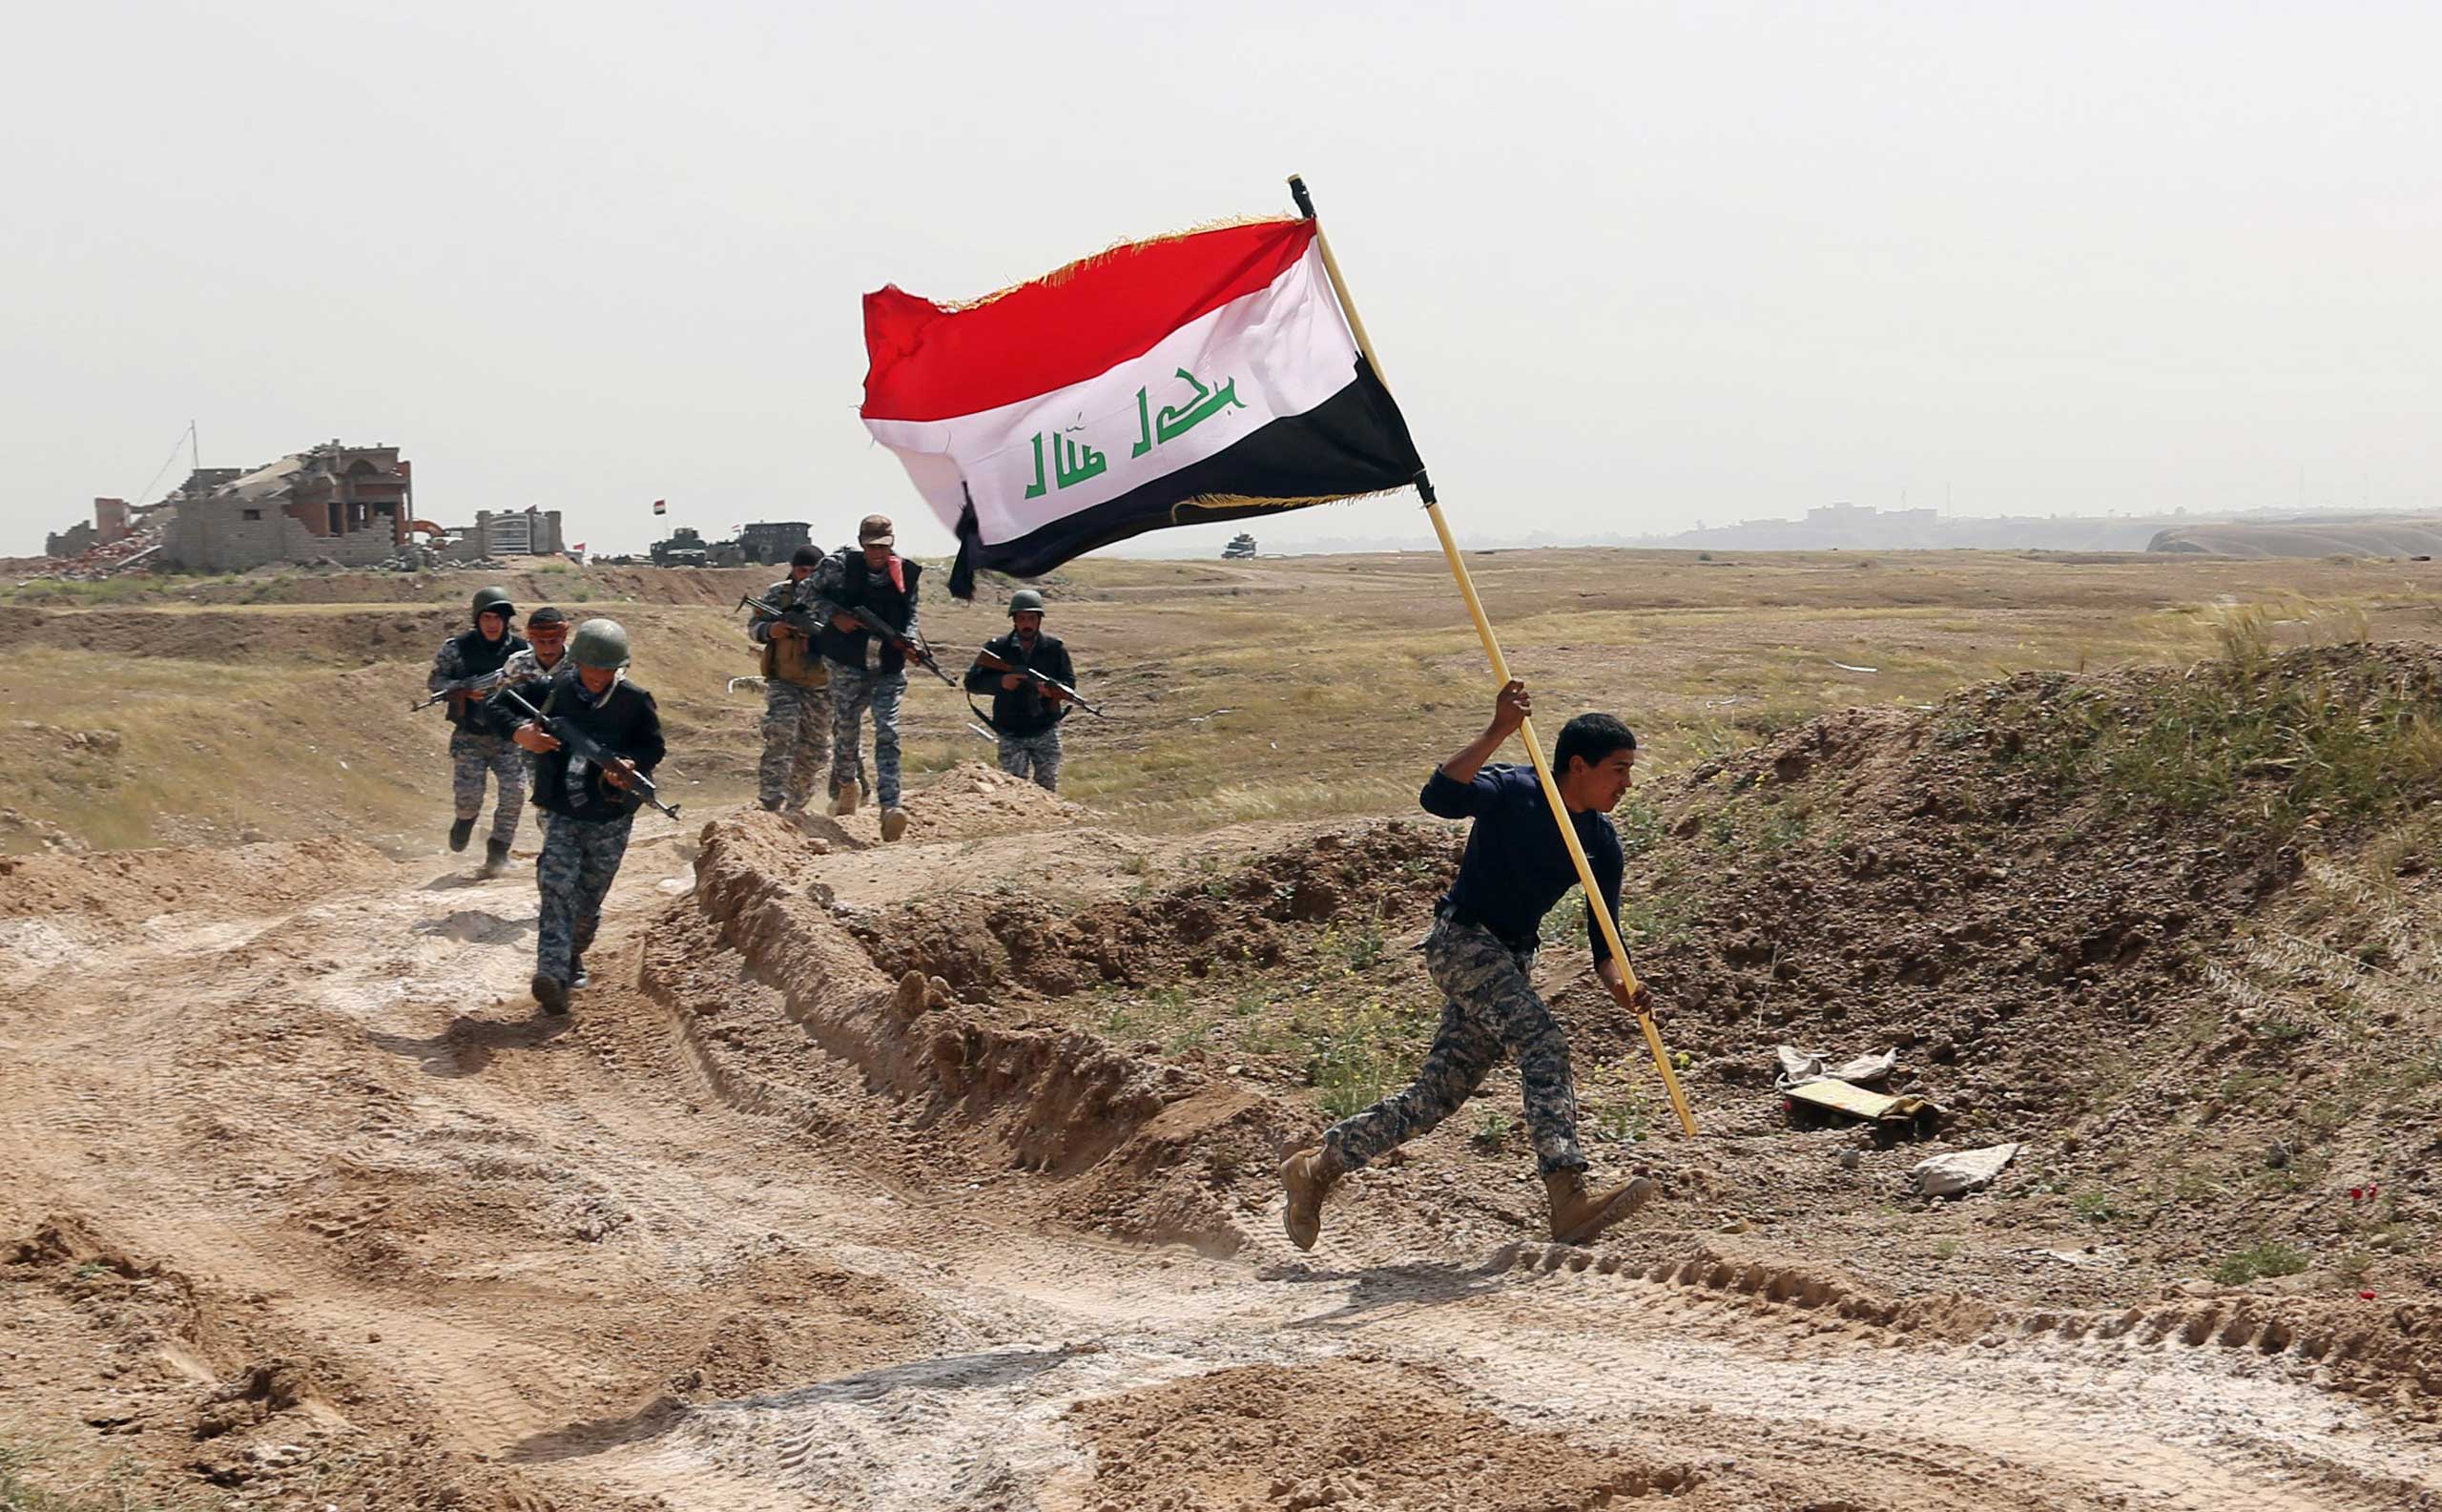 A member of the Iraqi security forces runs to plant the national flag as they surround Tikrit during clashes to regain the city from Islamic State militants, 80 miles north of Baghdad, Iraq, March 30, 2015.